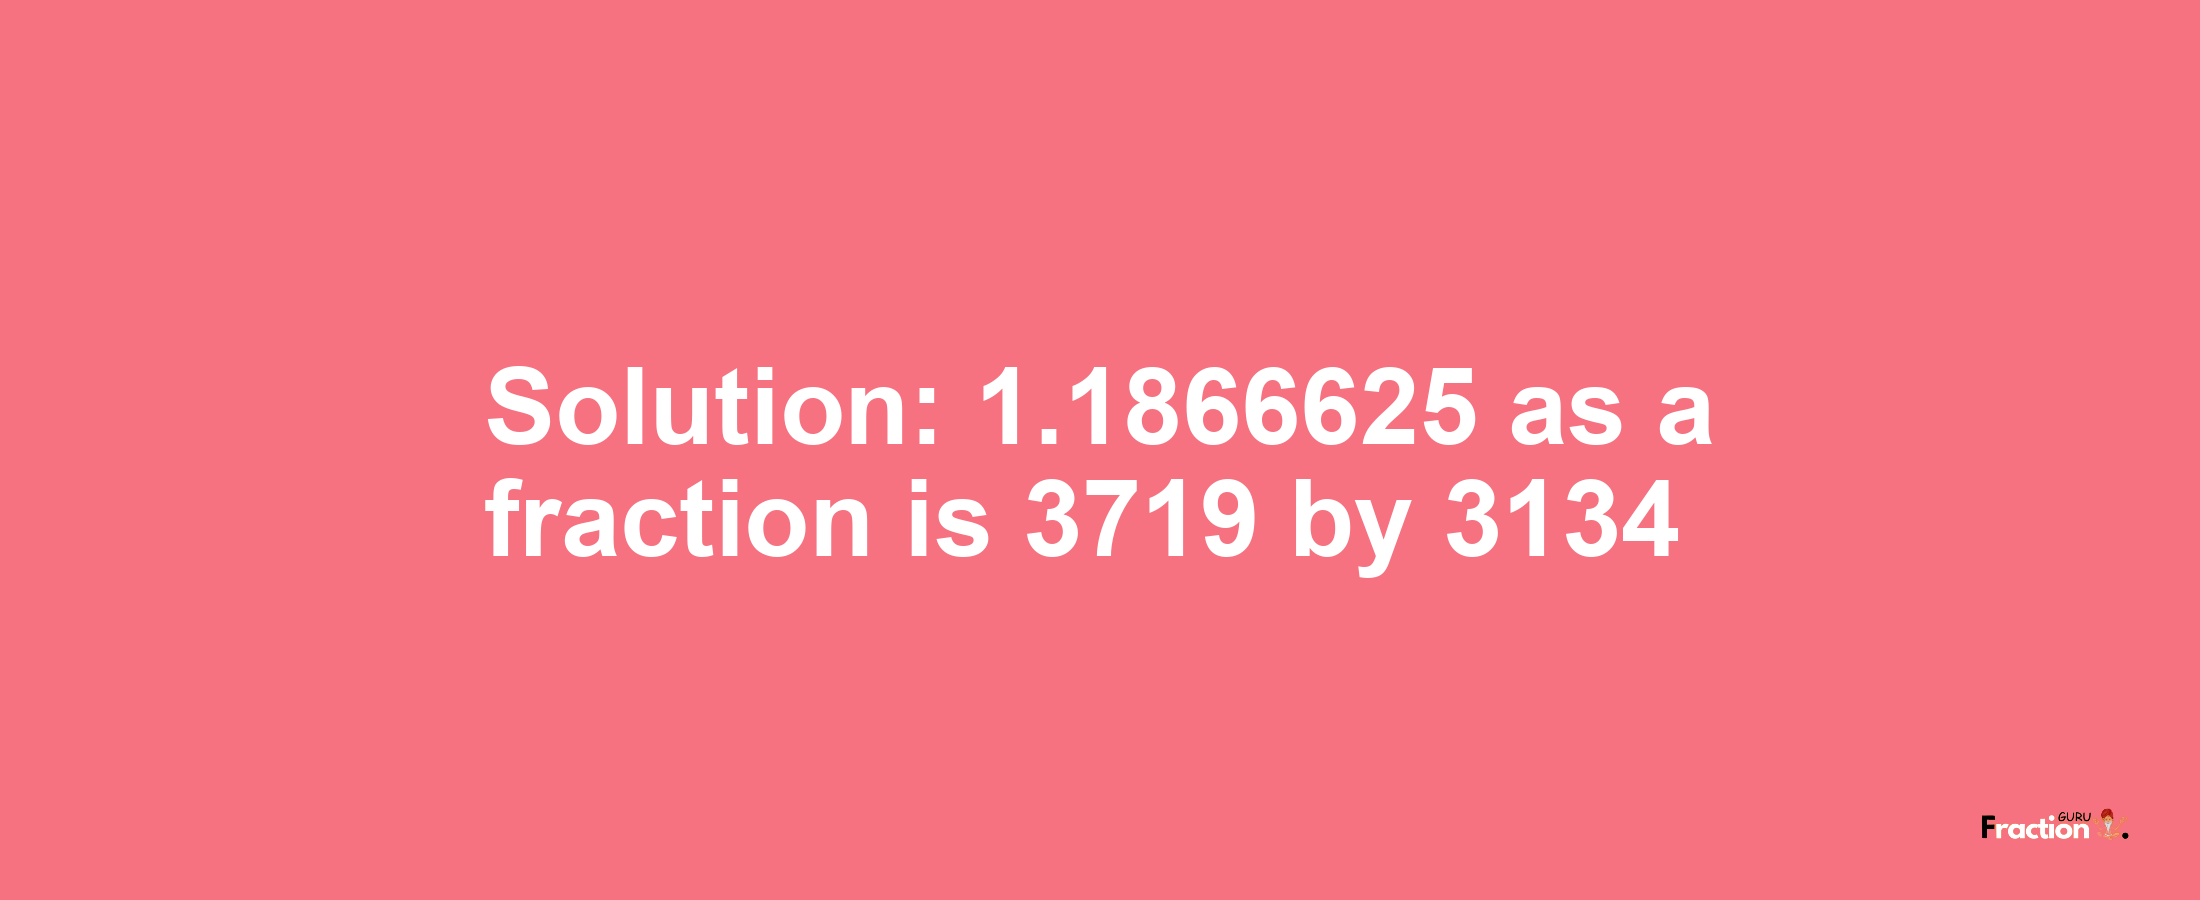 Solution:1.1866625 as a fraction is 3719/3134